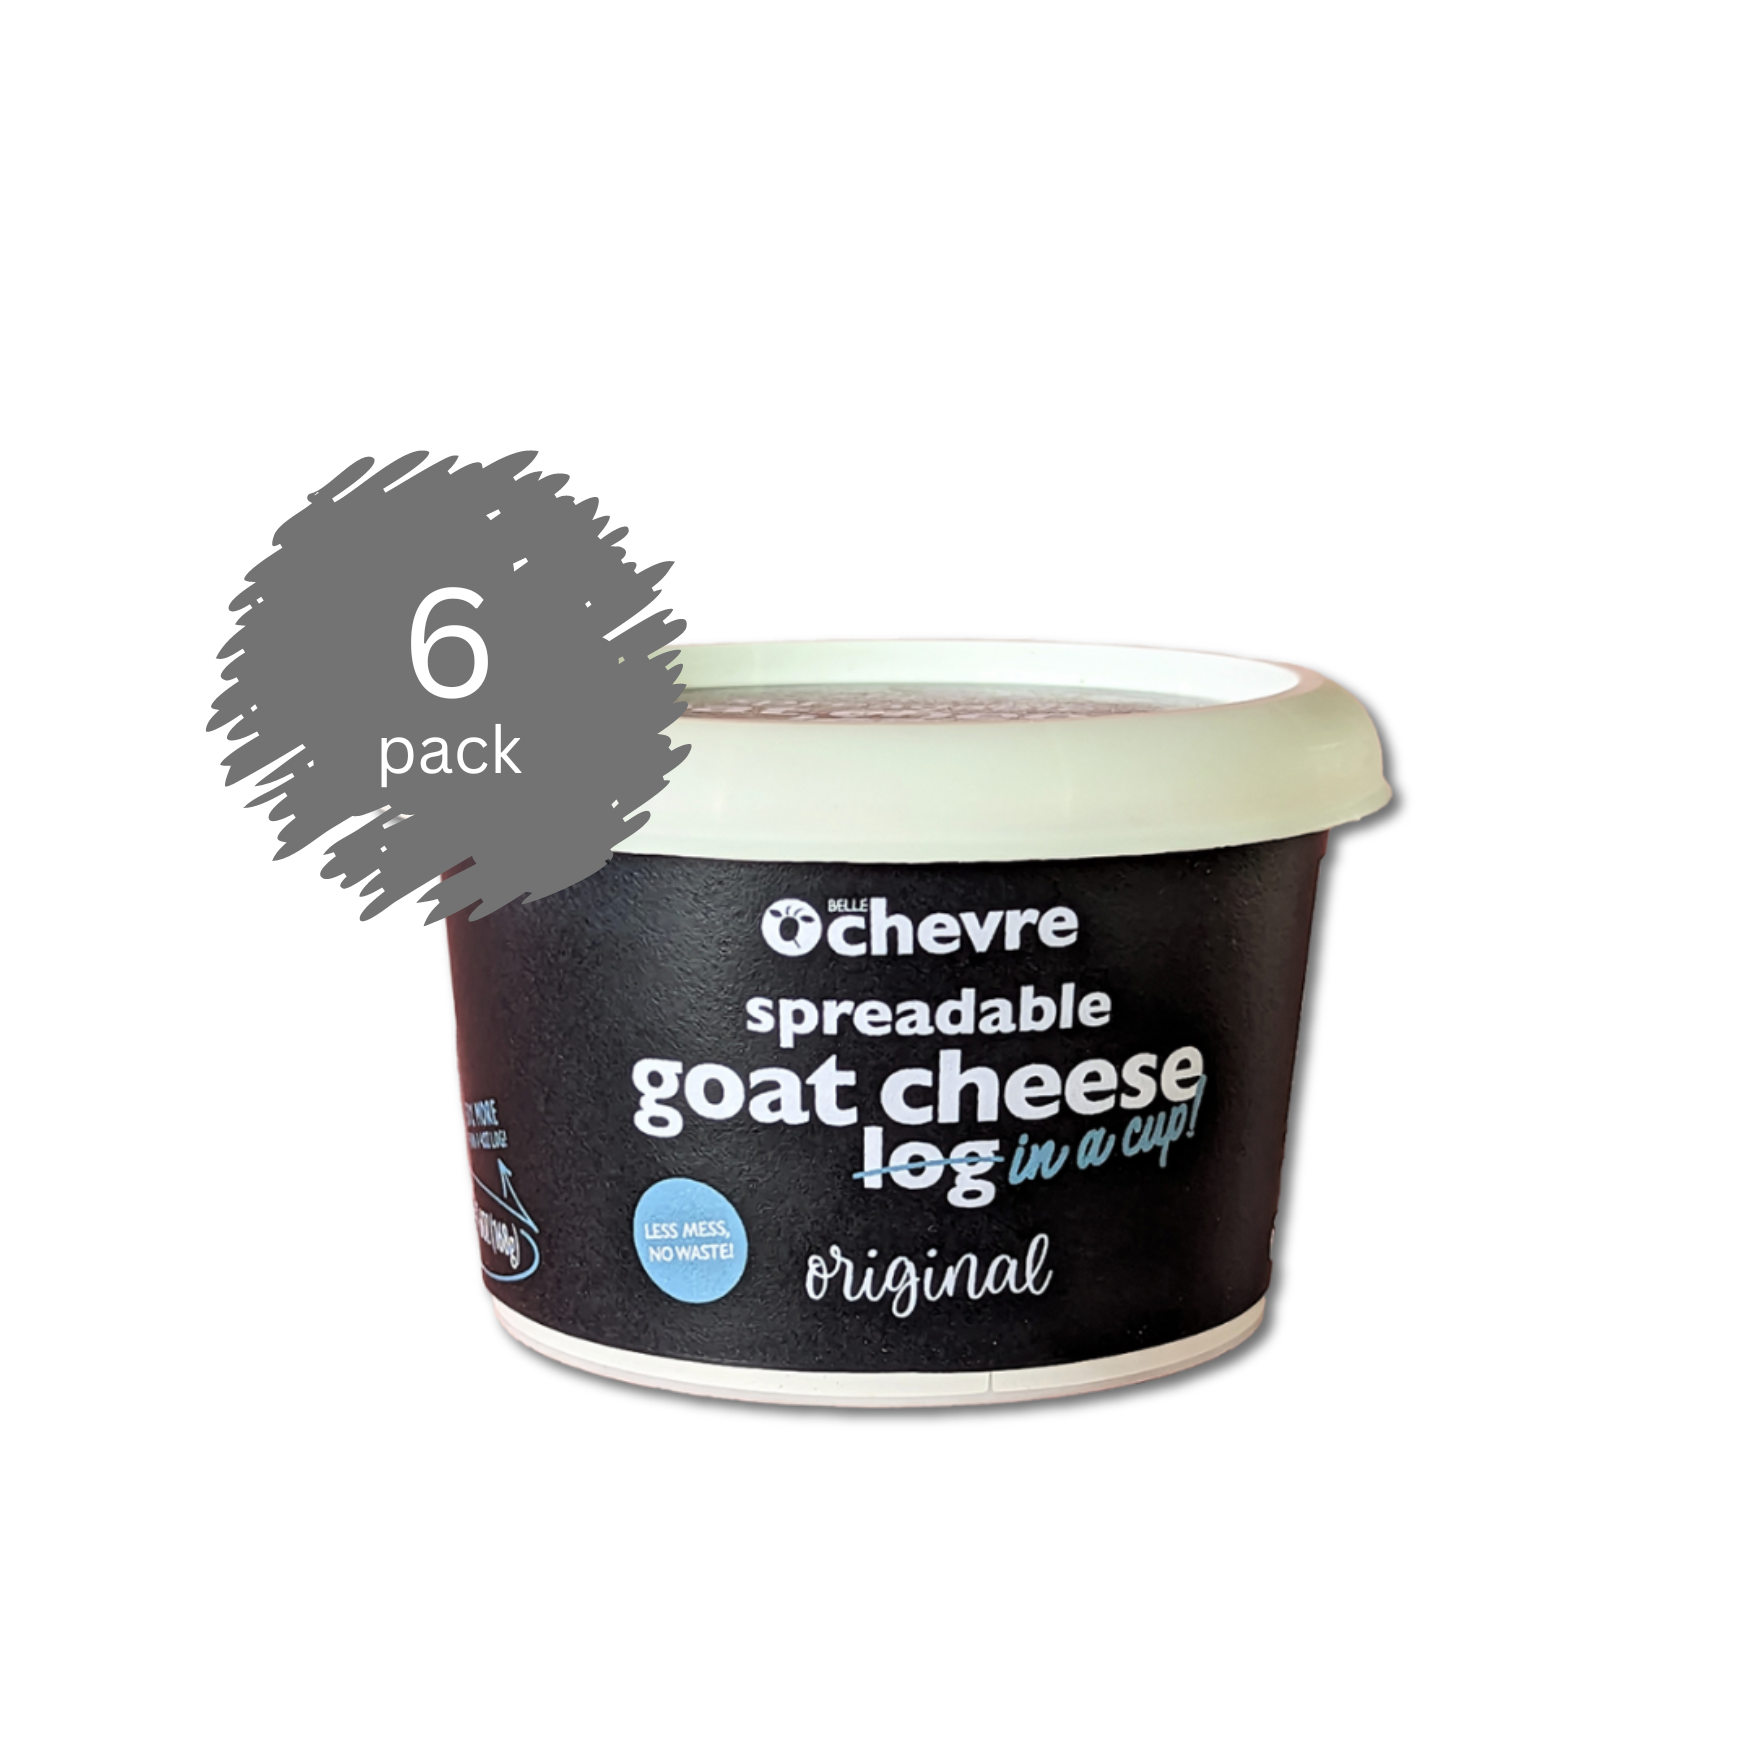 Wholesale - Belle Chevre Spreadable Goat Cheese Log in a Cup - Original (case of 6)